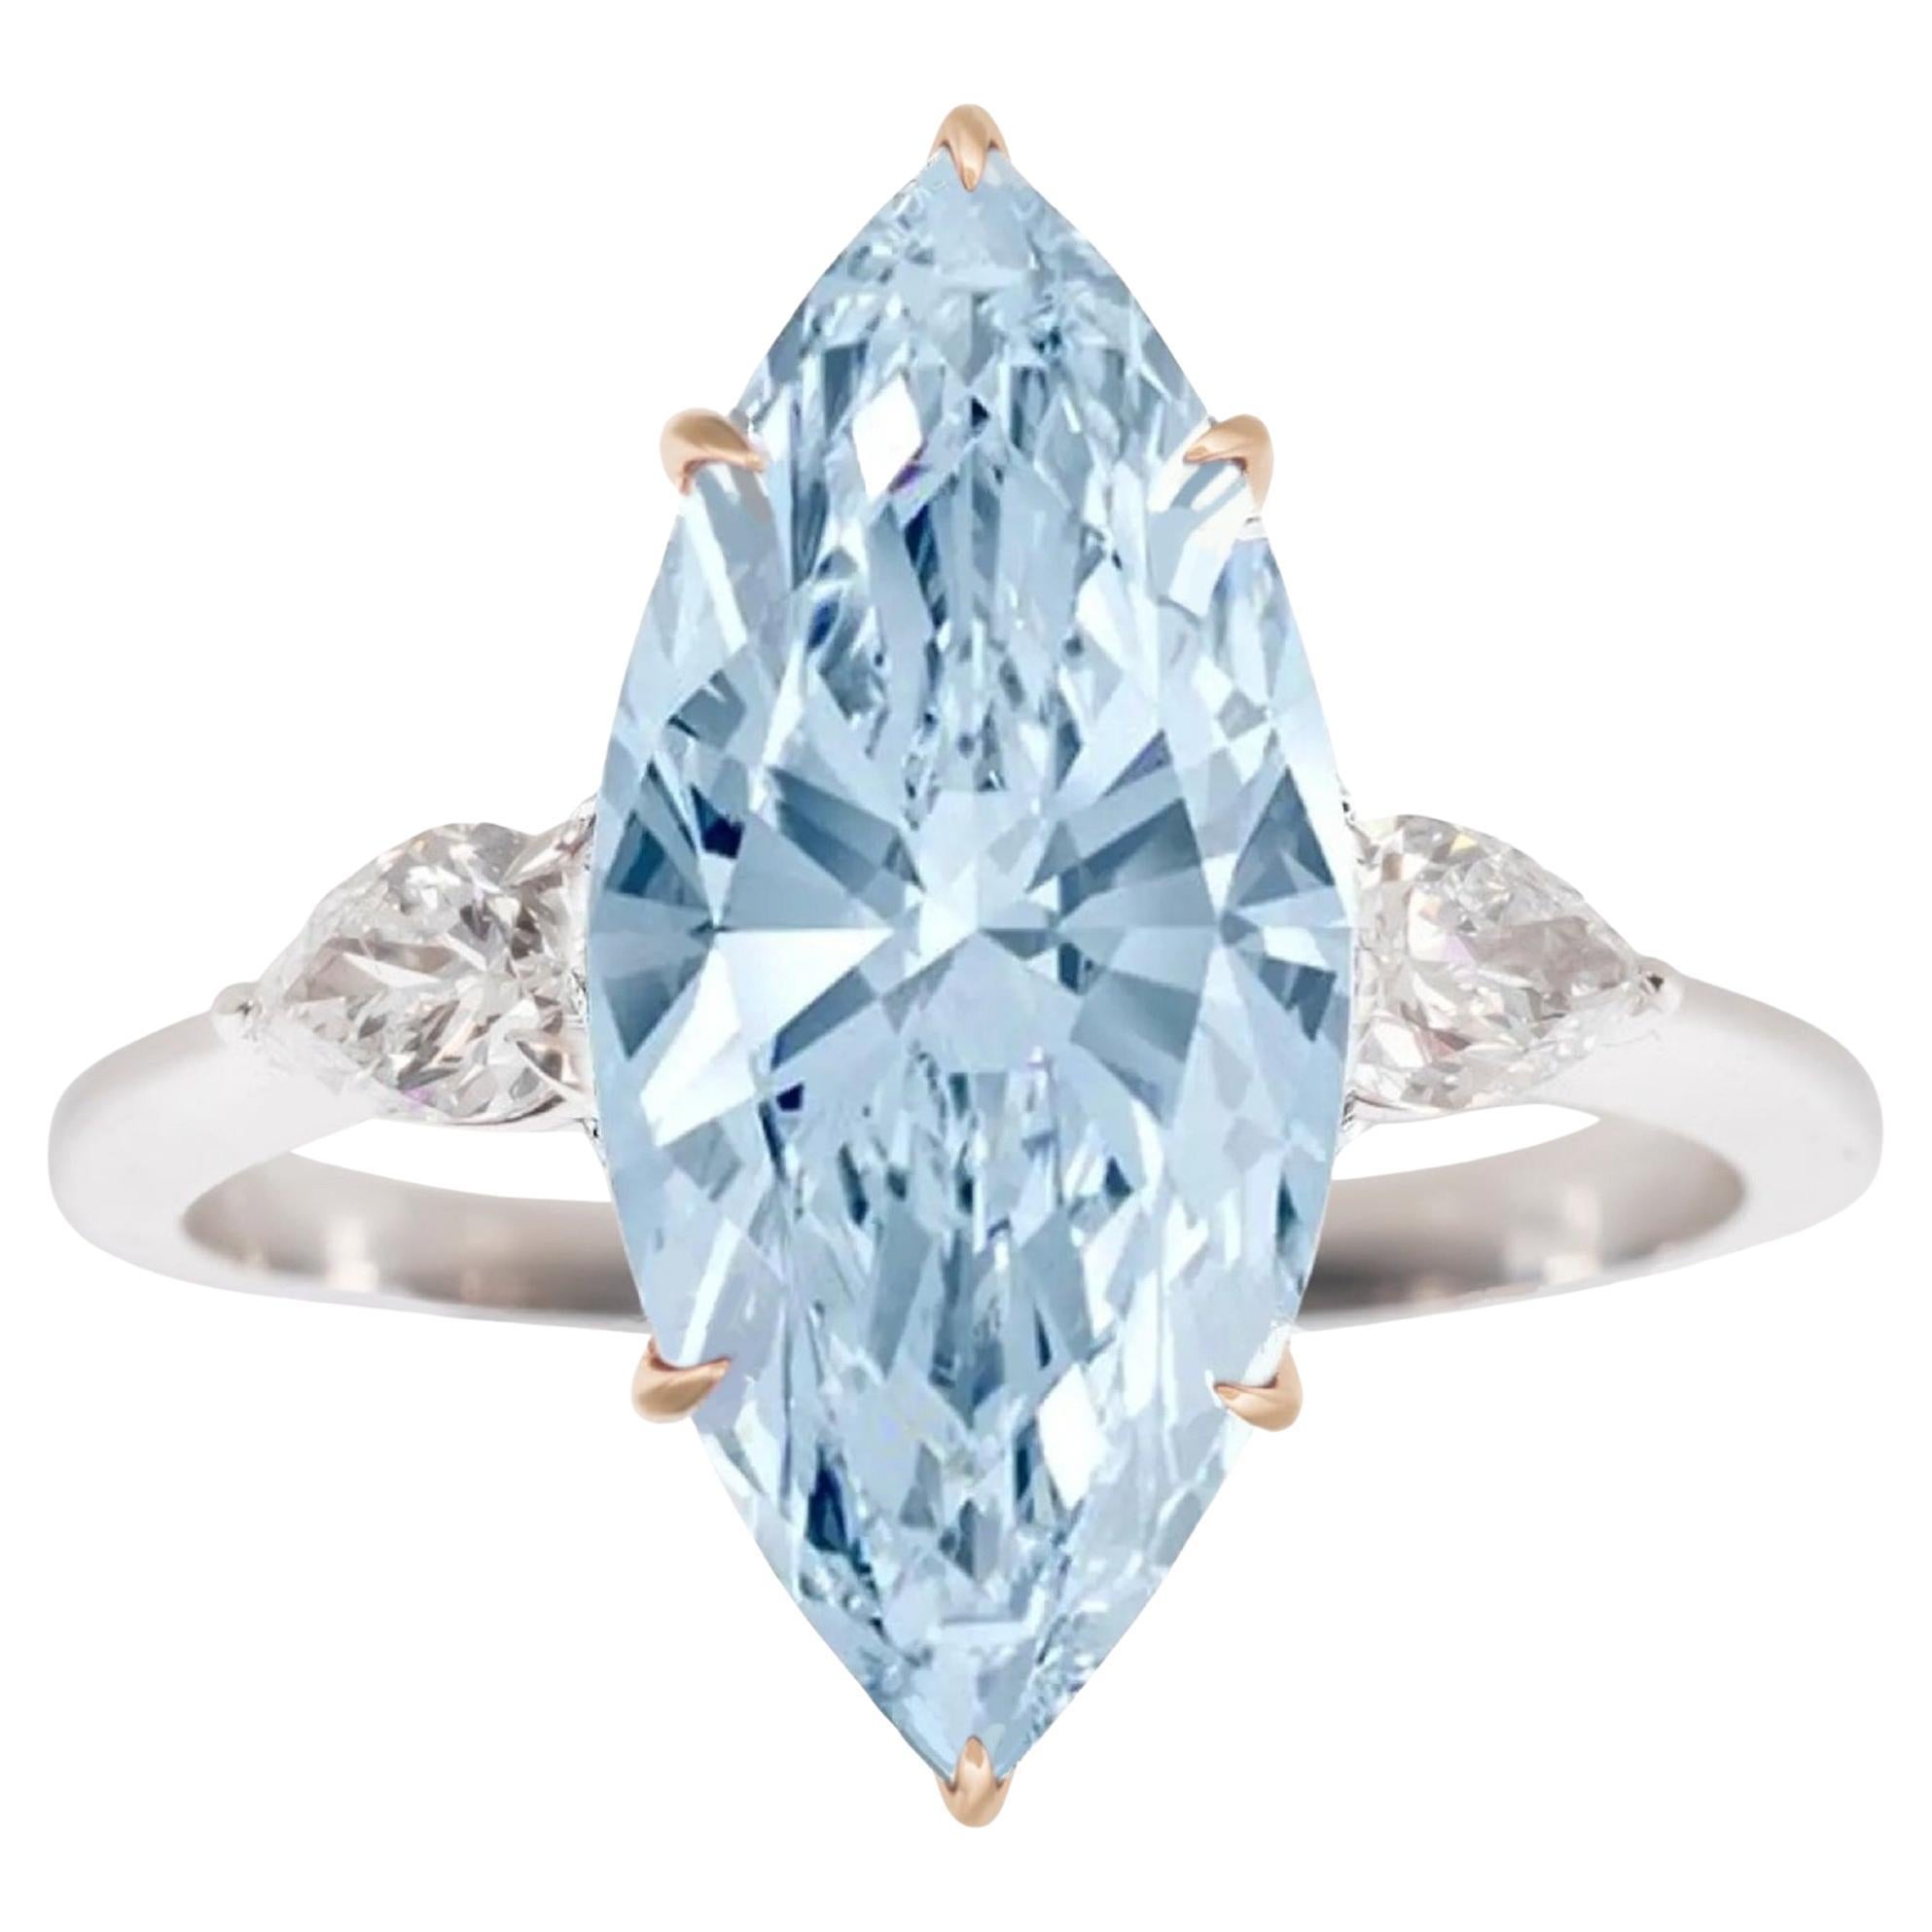 Highly Important Flawless GIA Certified Fancy Intense Blue Diamond